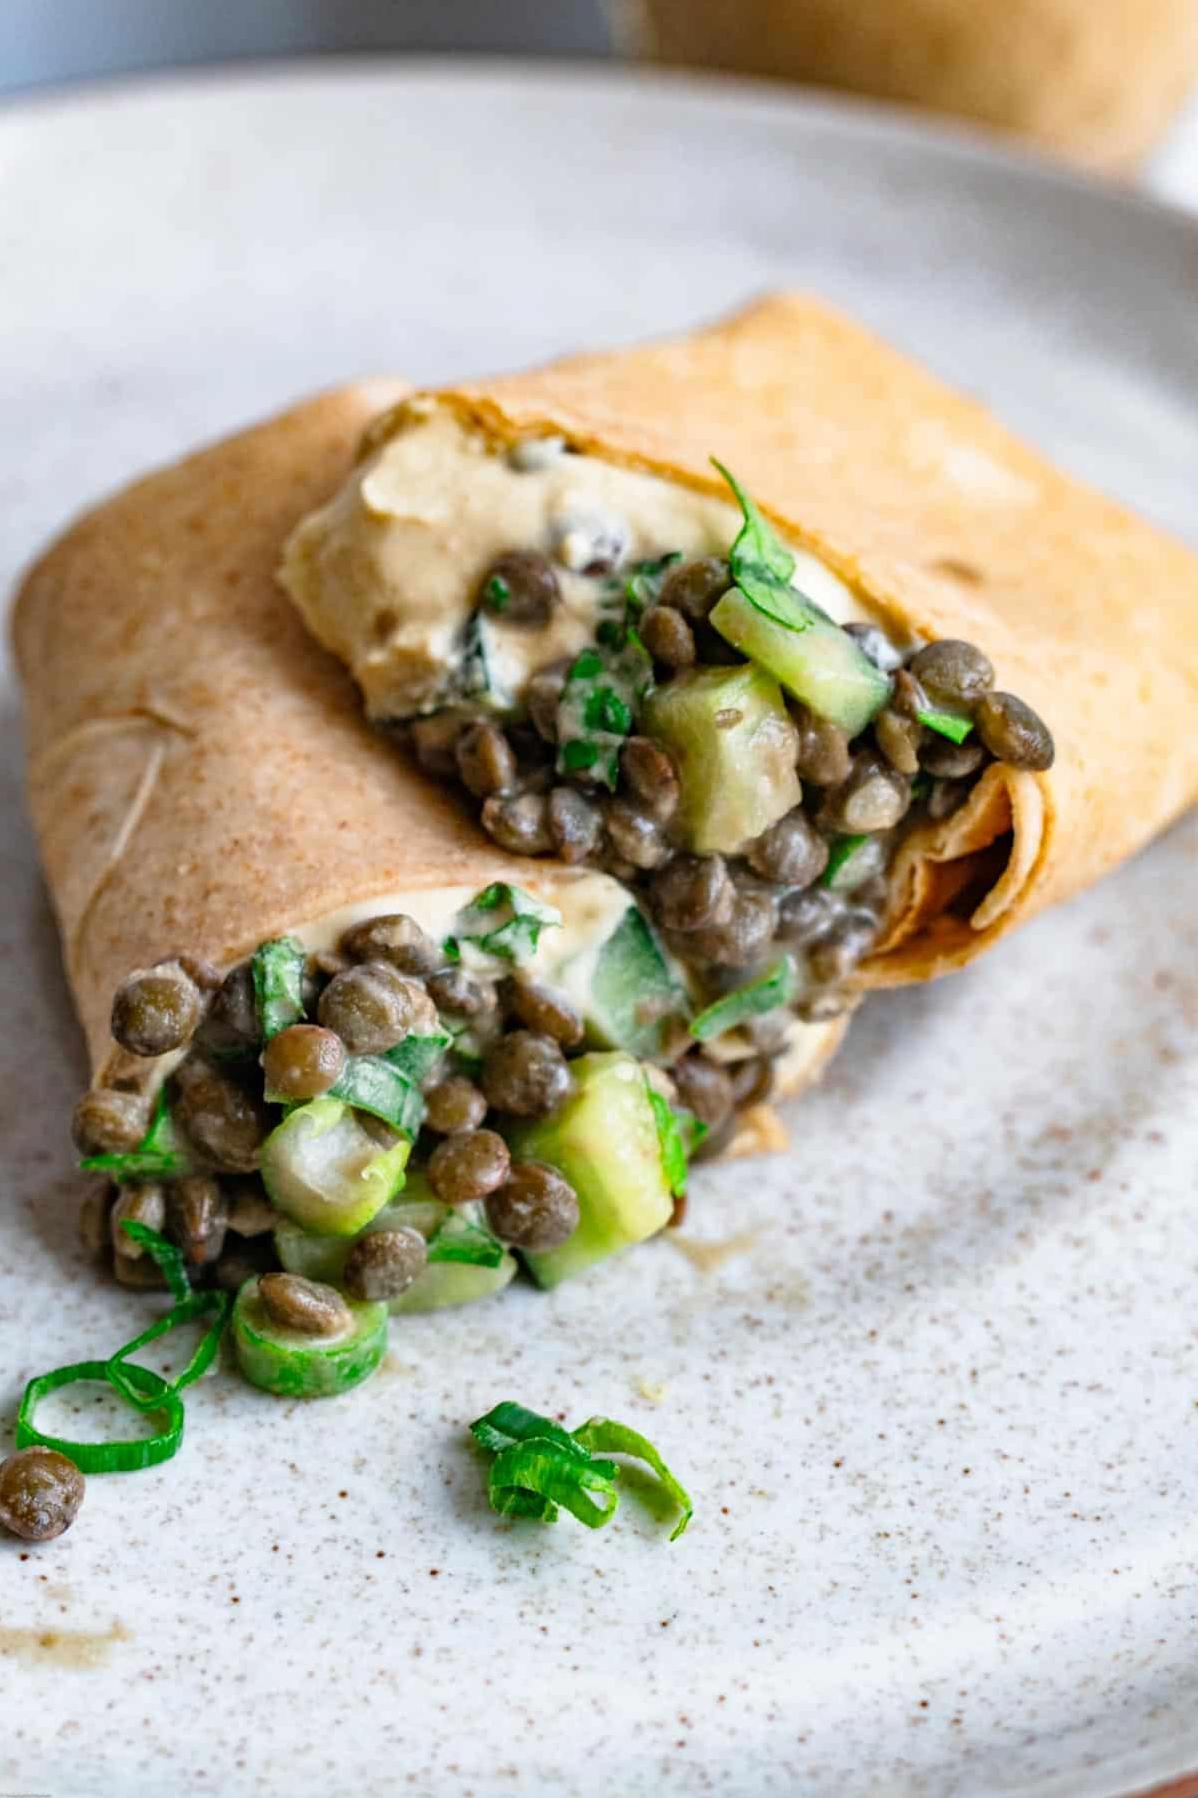  Fill your belly with these nutritious Lentil and Roasted Vegetable Wraps.